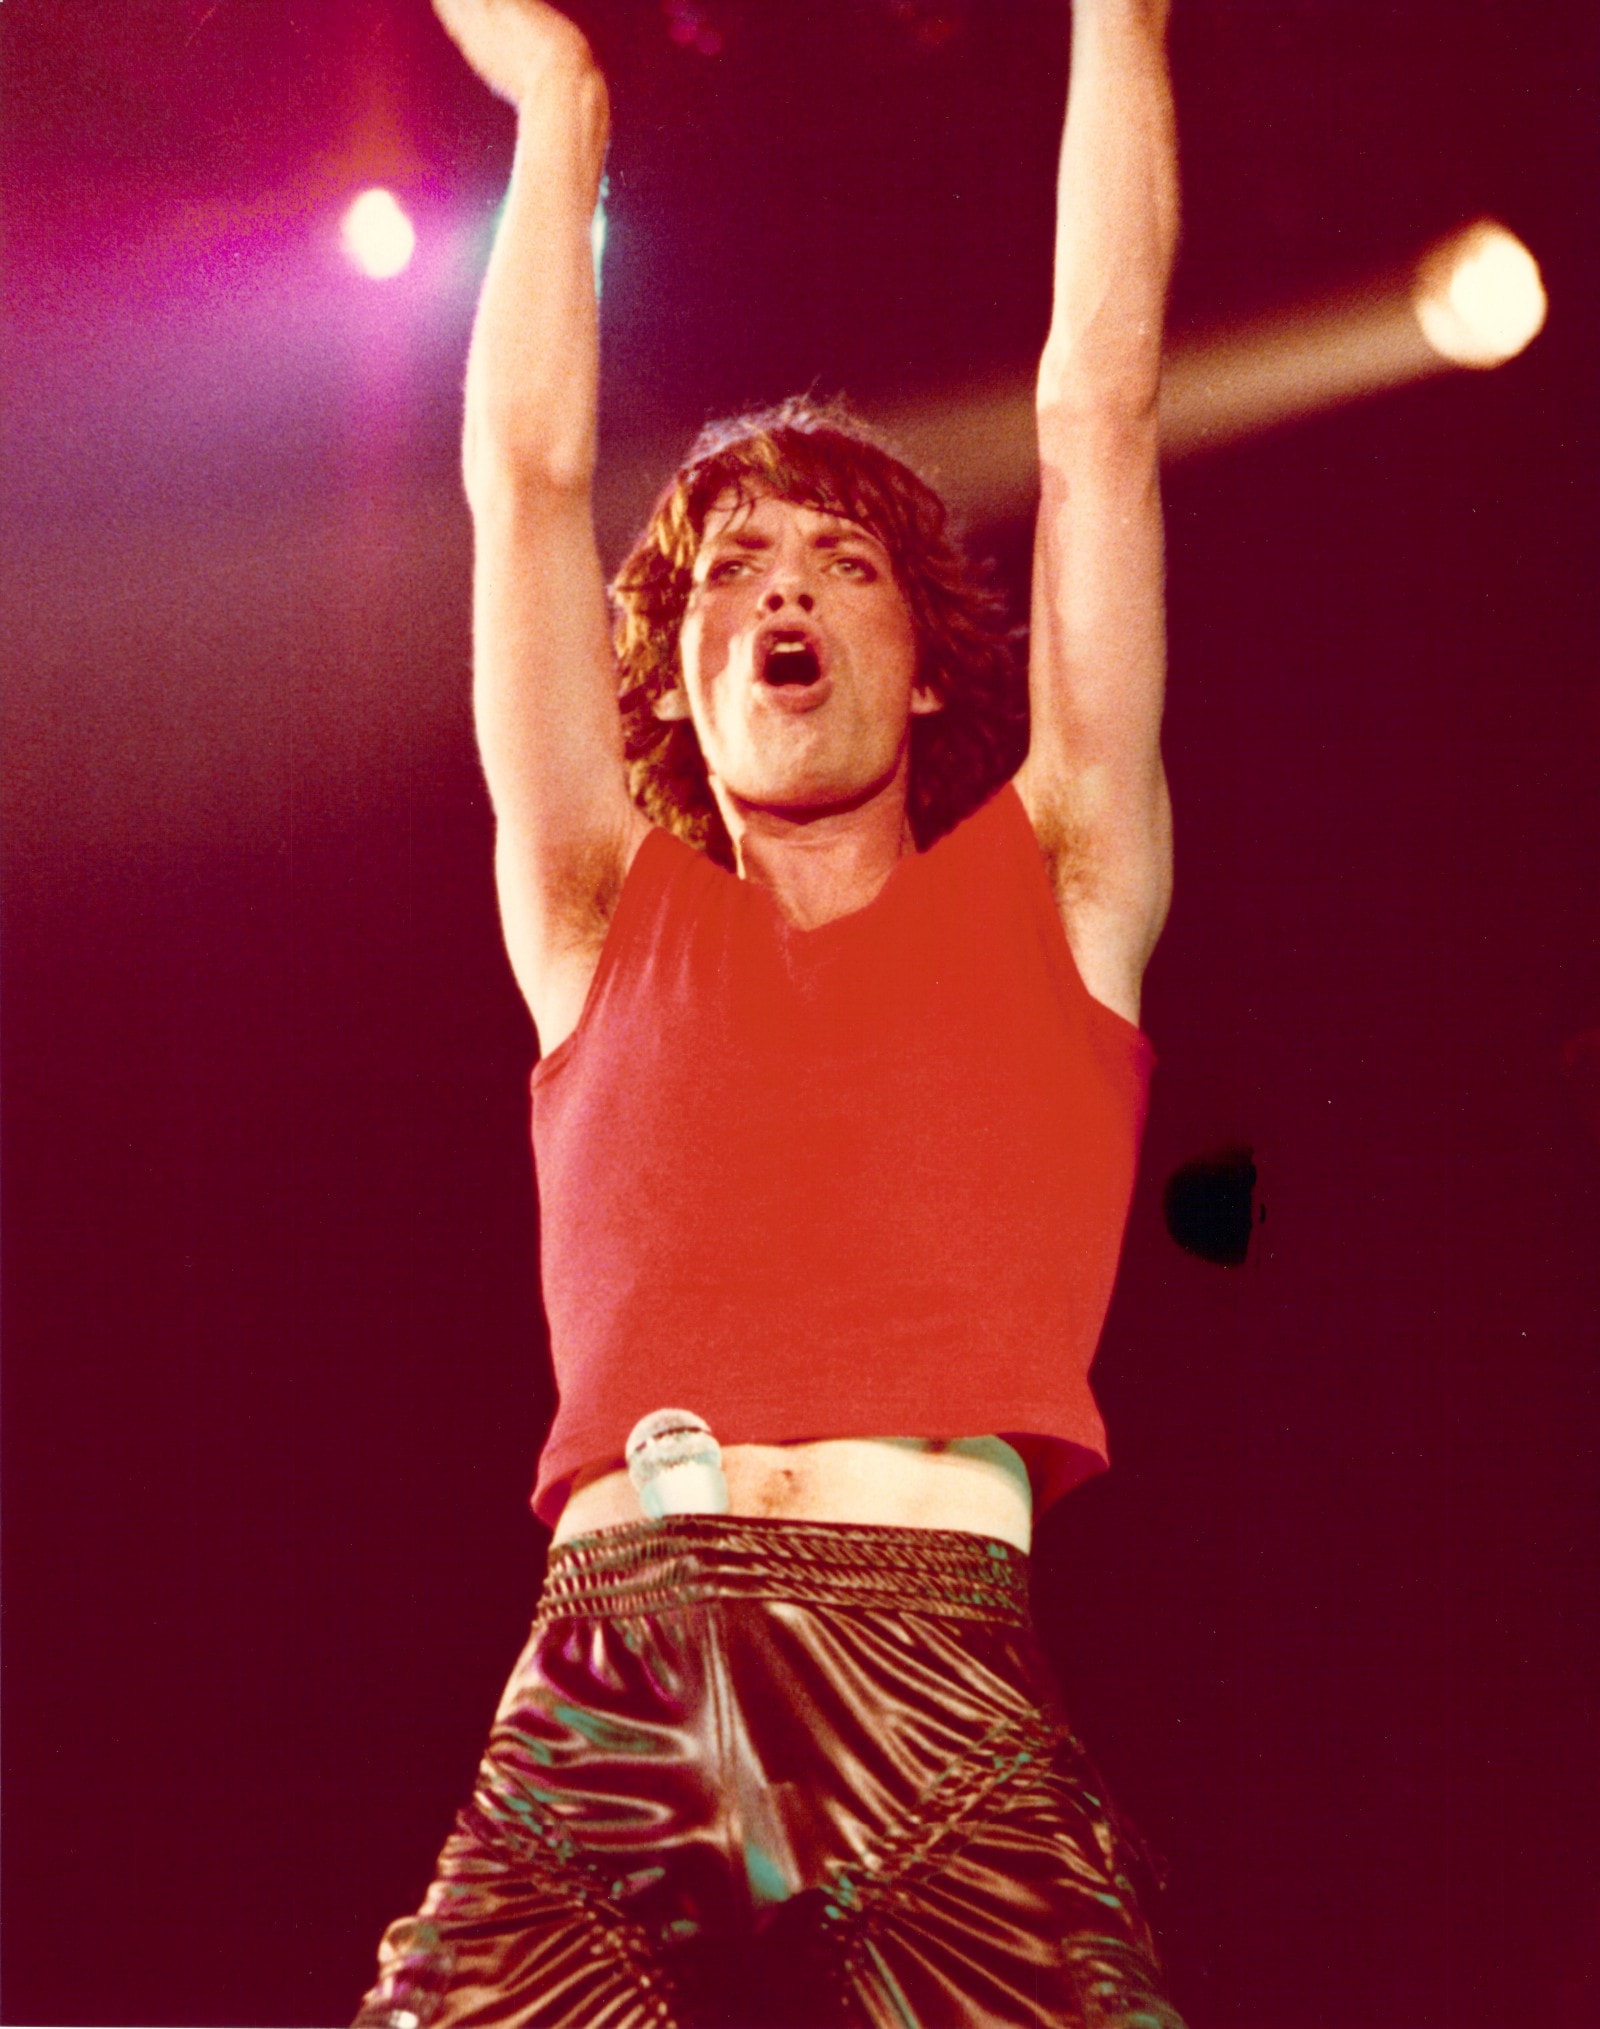 Mick Jagger, Net Present Value, and the new FASB/IFRS Lease Accounting Rules